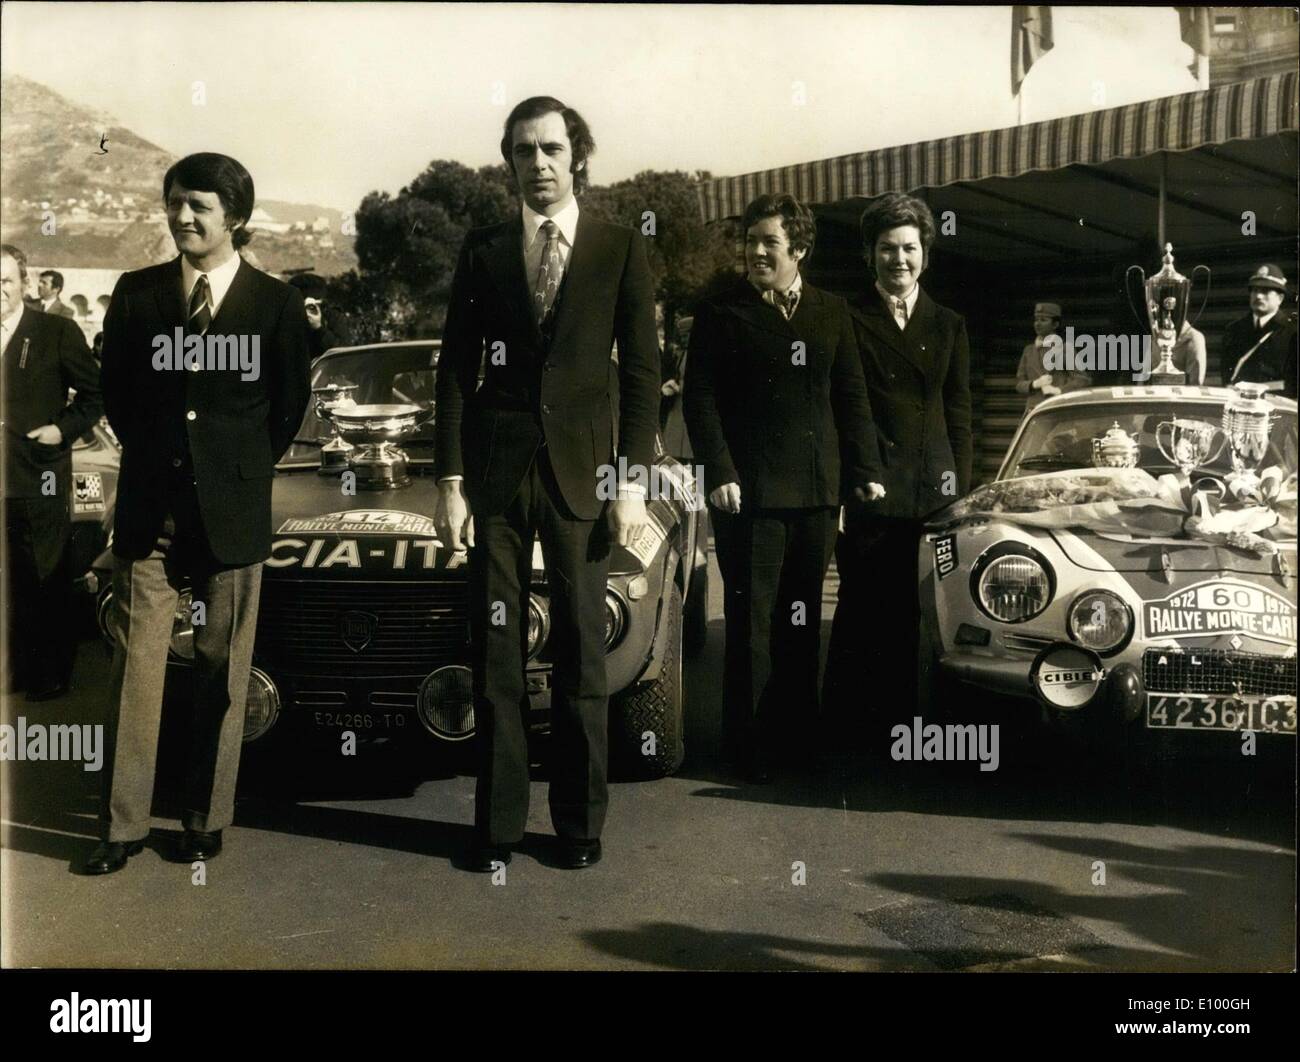 Jan. 30, 1972 - Prizes were given to the winners of Monaco's 41st Rally, which was dominated by the Italian team of Munari and Manucci, in Monte-Carlo. The royal family of Monaco attended the presentations. Munari and Manucci are pictured standing in front of their cars, along with Pat-Moss Carlsson ad Liz Crellin, who won the Ladies' Cup. Stock Photo